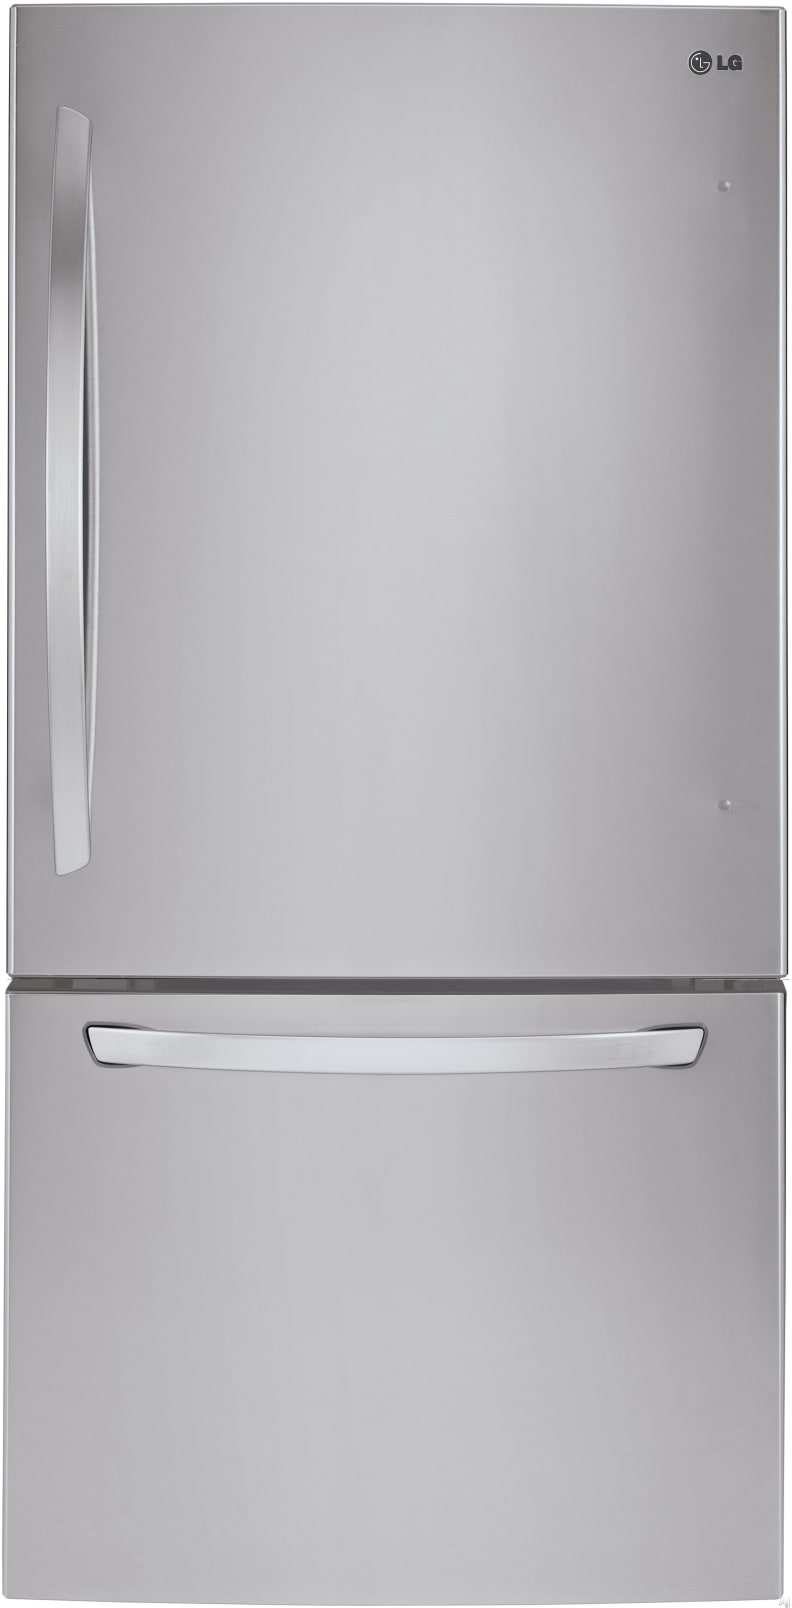 The LG LDCS24223S is the stainless steel version of this 24-cu.-ft. fridge.